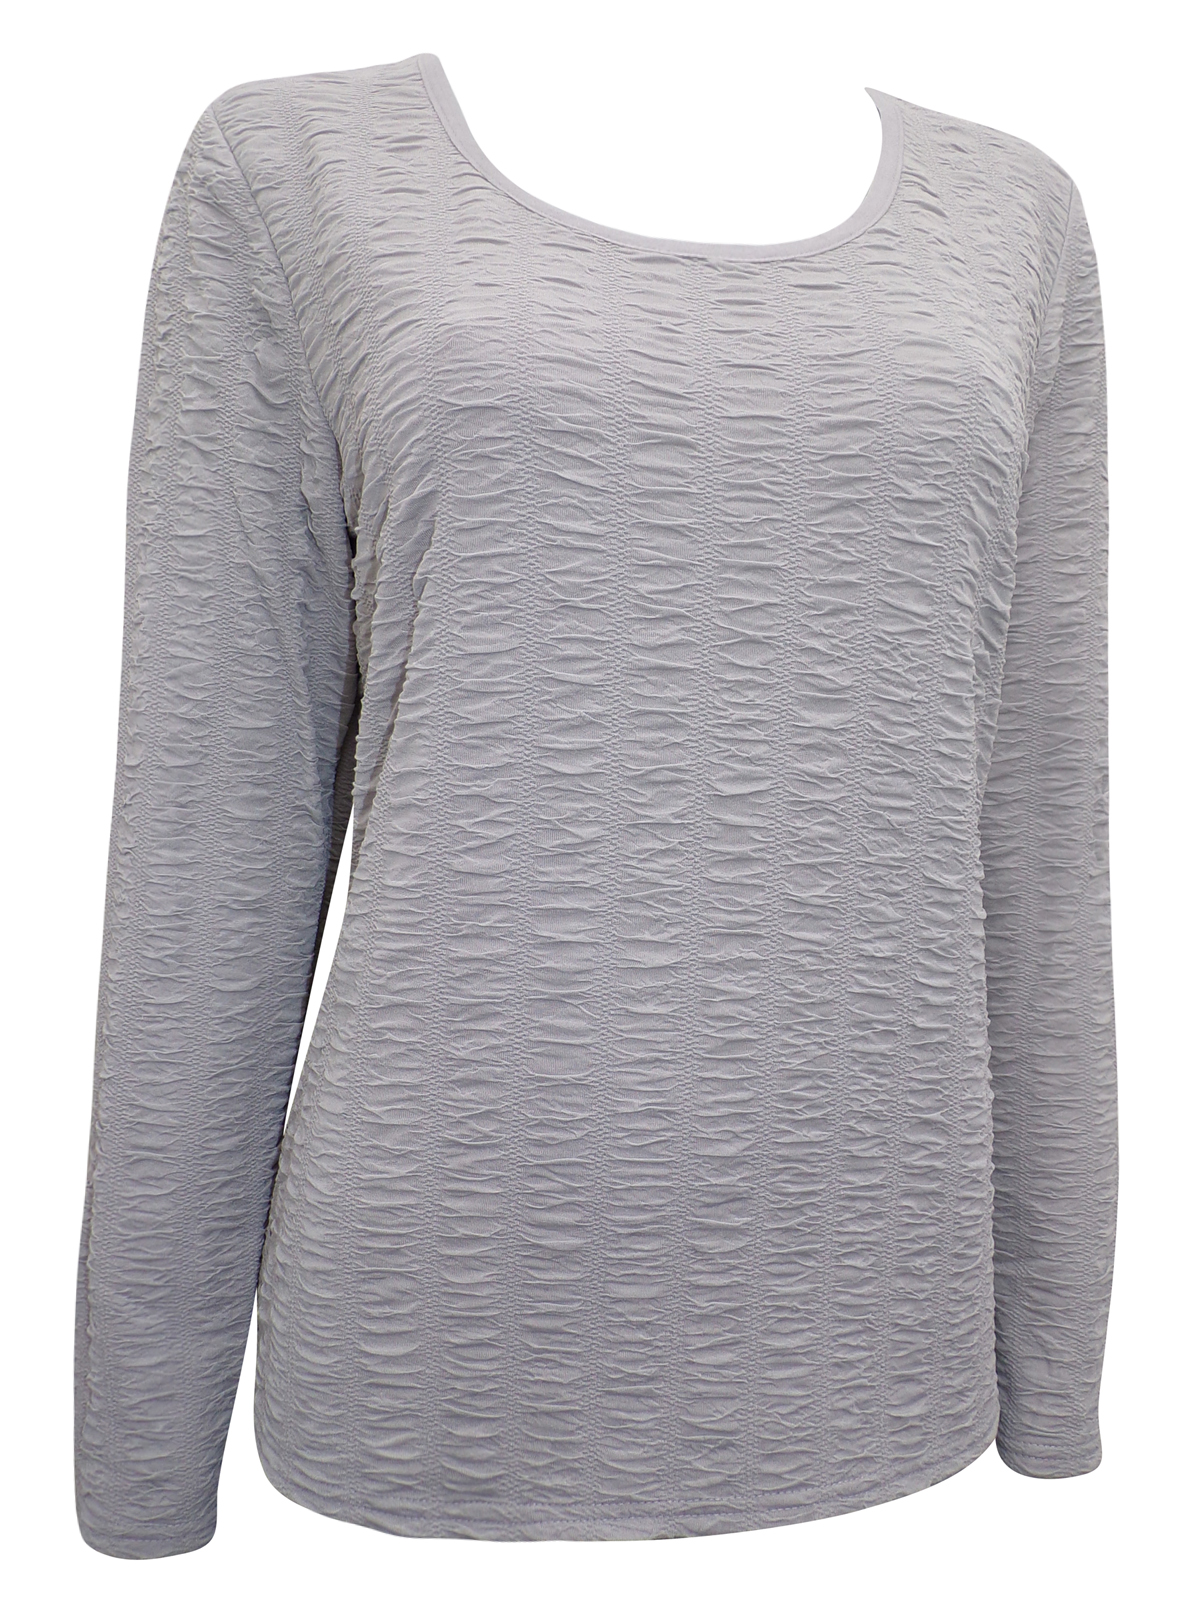 //text.. - - GREY Waffle Textured Long Sleeve Top - Size Small to XLarge